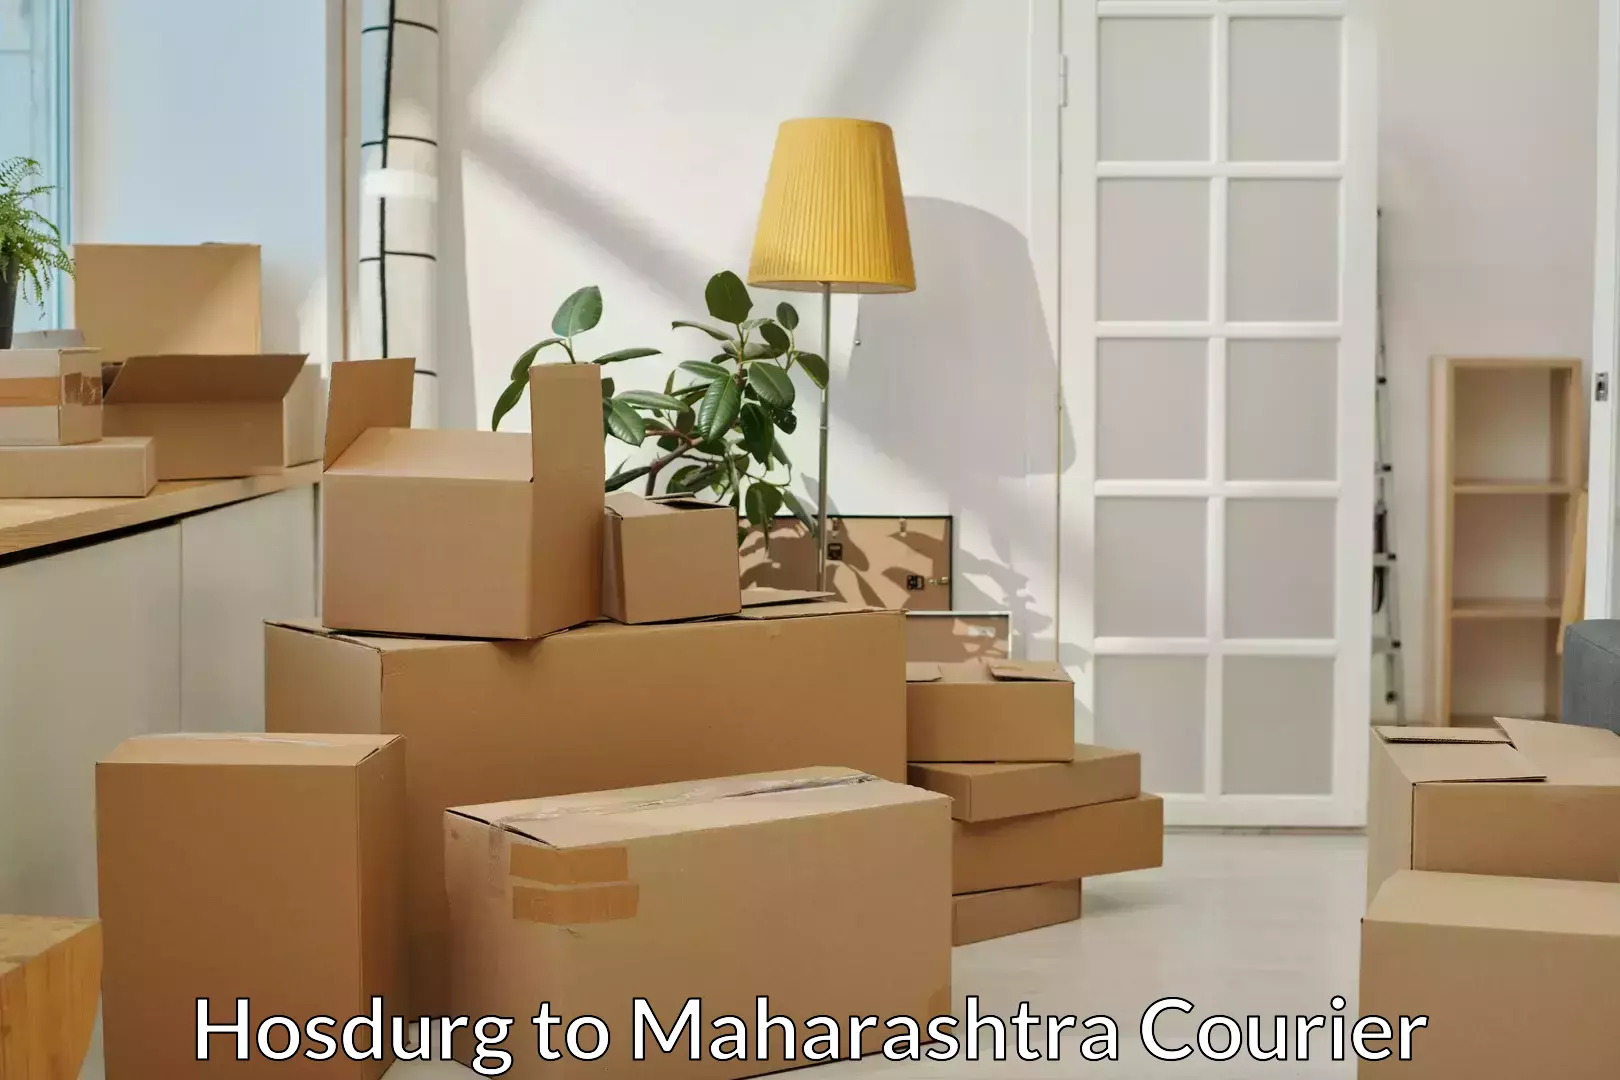 Budget-friendly moving services in Hosdurg to Mahim